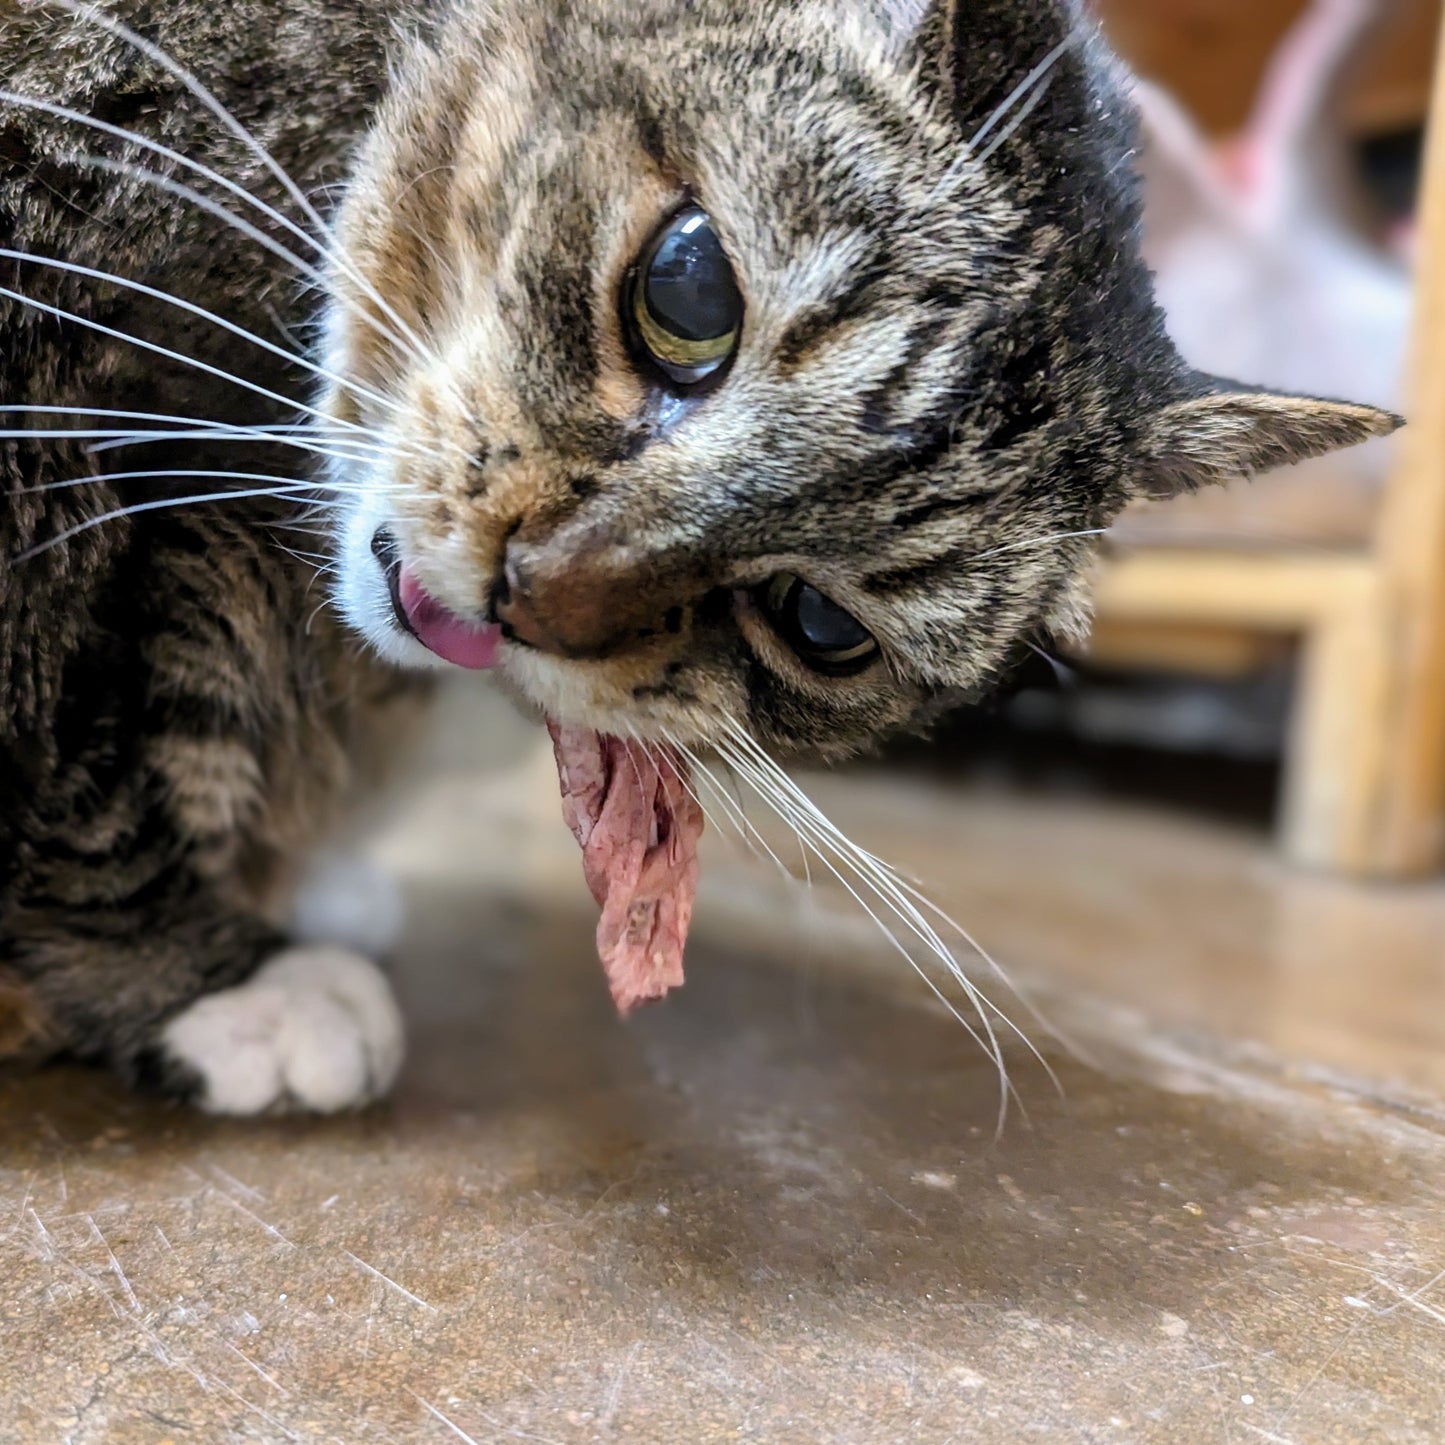 An ultimate upcycled byproduct - a tabby cat licking Beast Feast's Freeze-Dried Bison Tunica Twist.